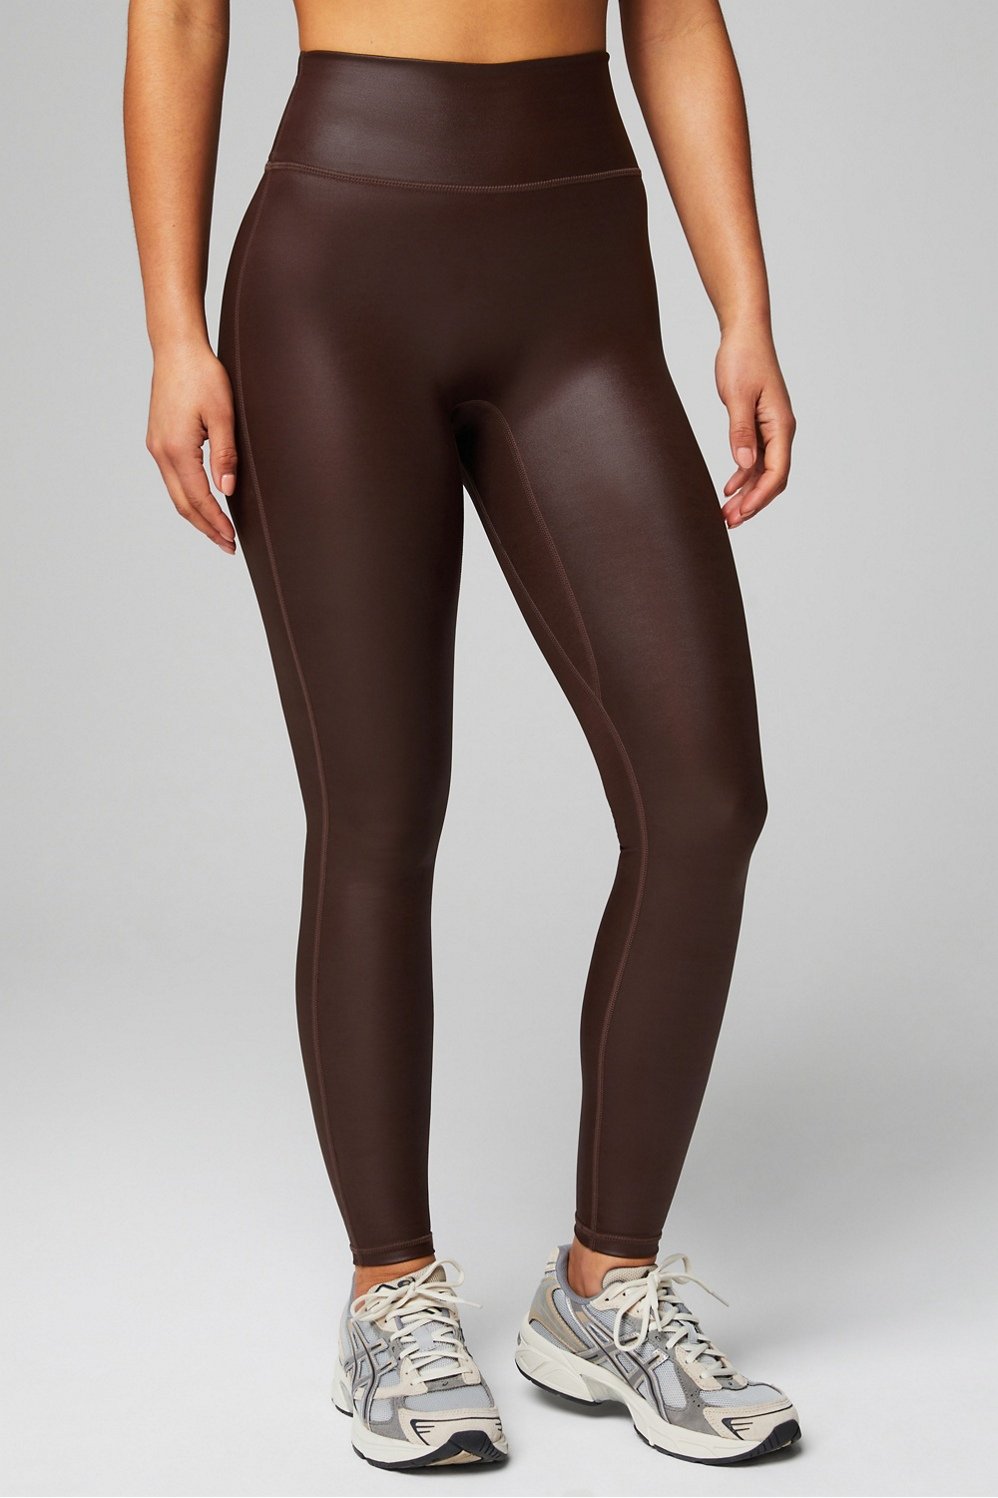 Women's High-Waisted ButterBliss Leggings - Wild Fable™ Brown M